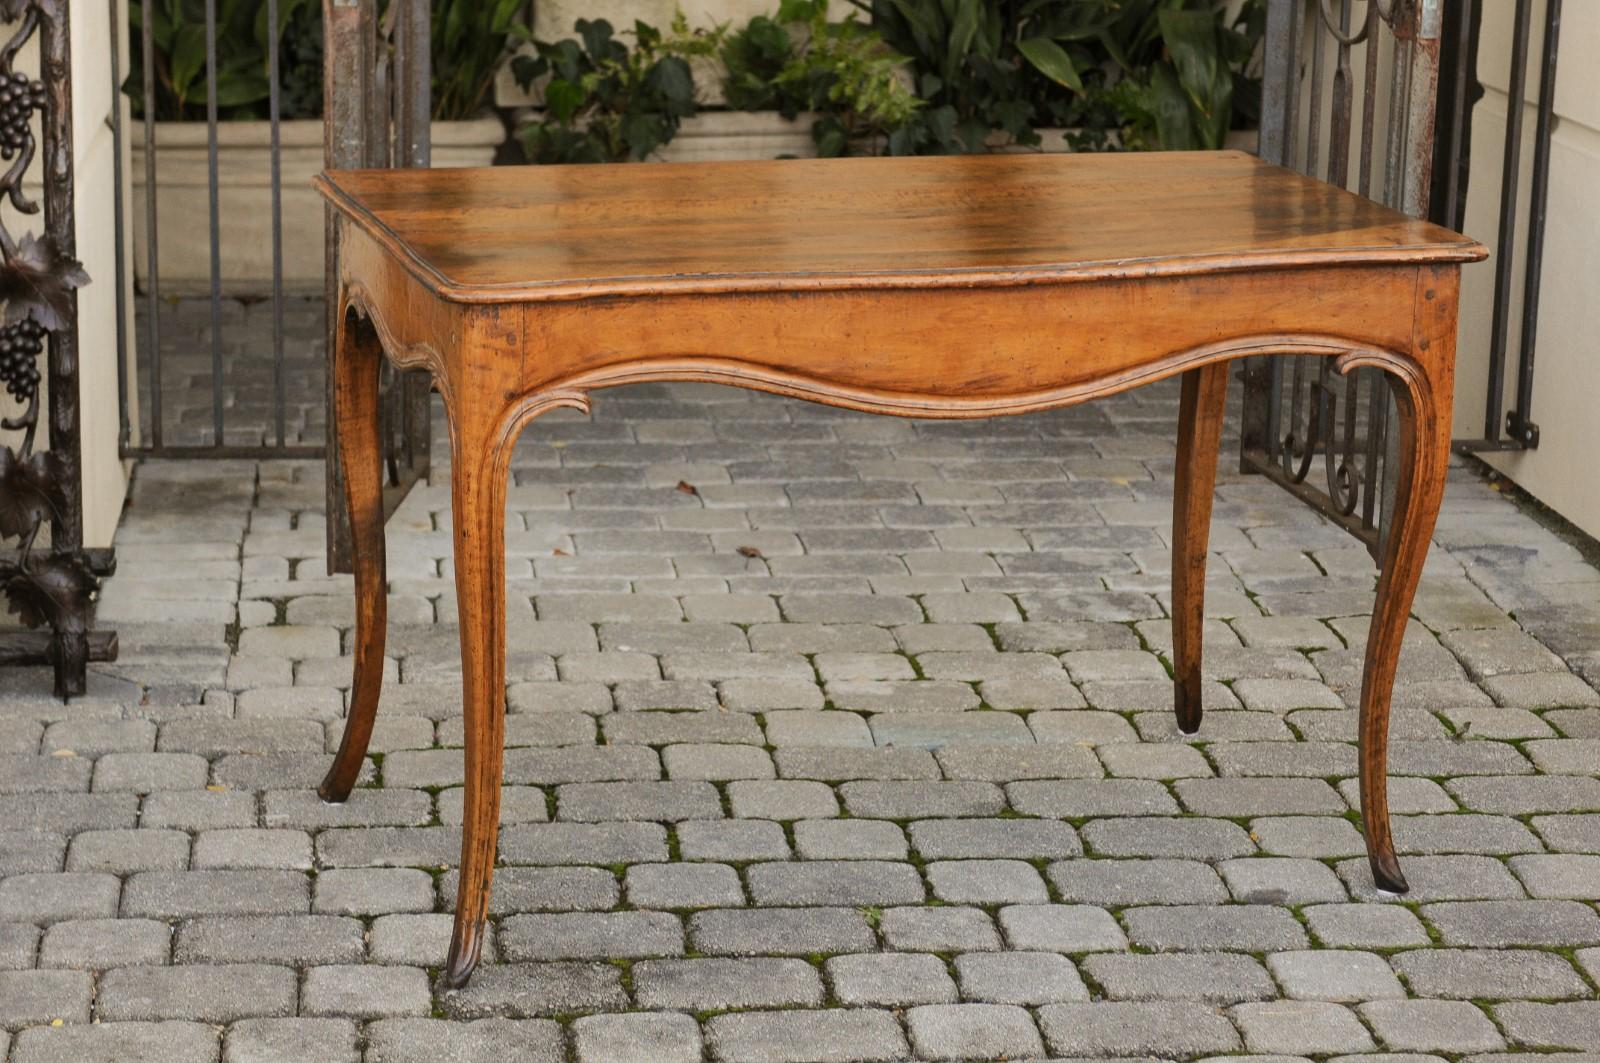 A French Louis XV style walnut console table from the early 19th century, with cabriole legs. Born in France during the Restauration period that saw the temporary return of the Bourbon monarchy, this exquisite walnut console table presents the